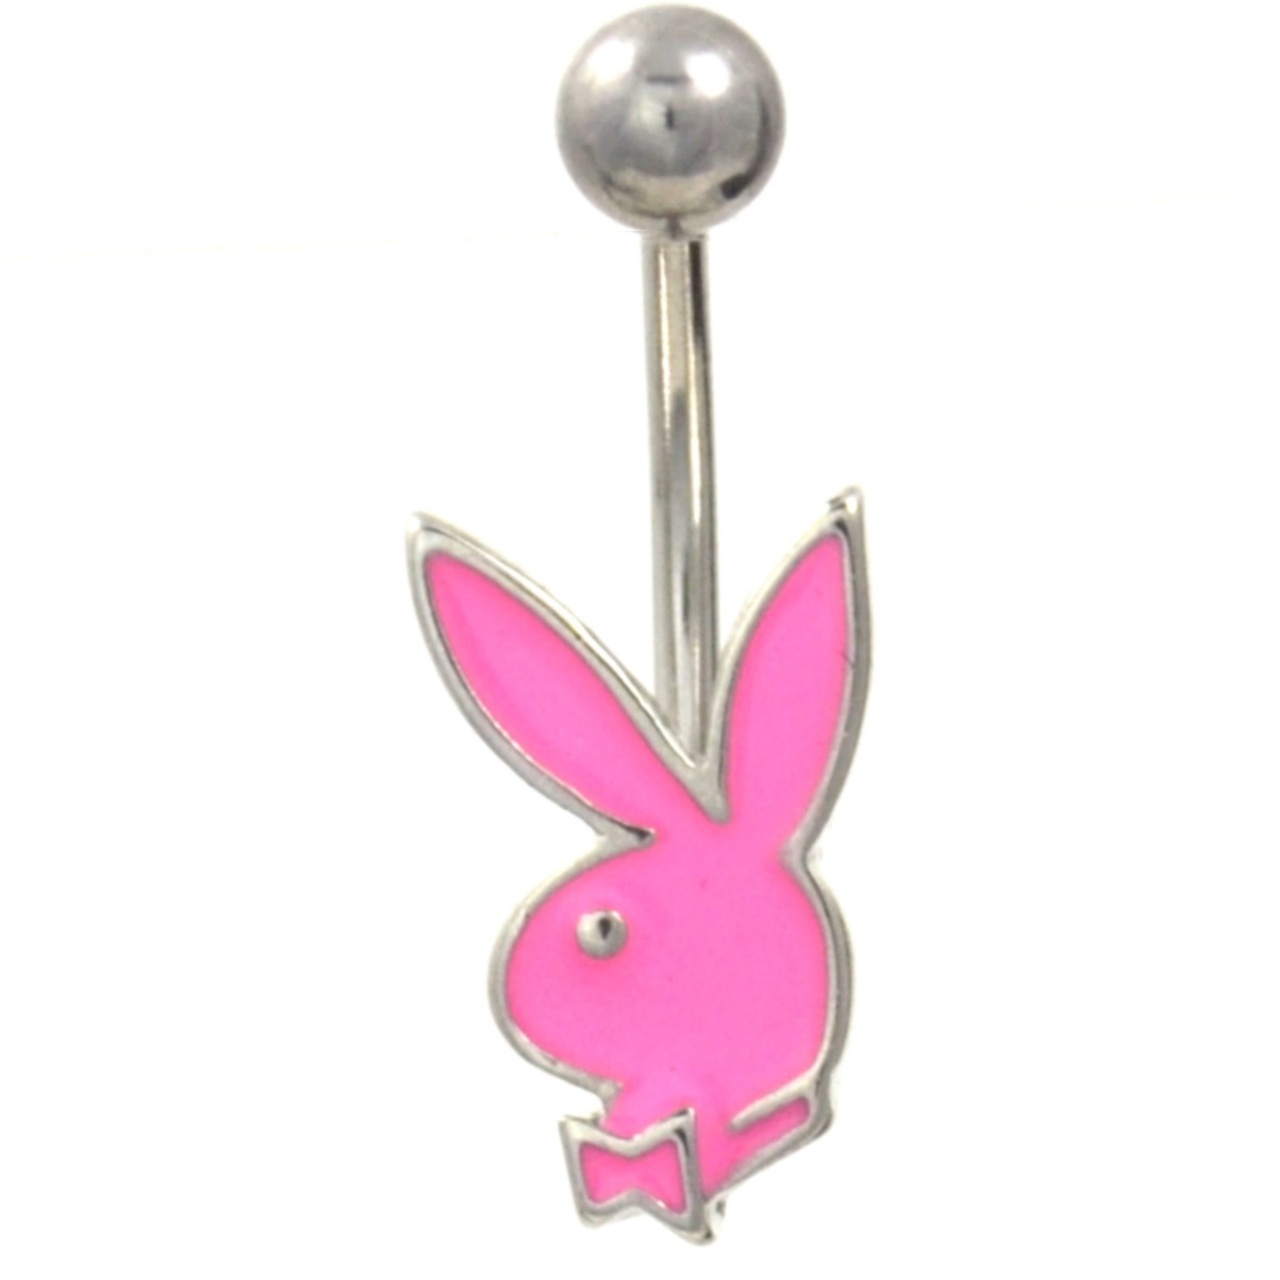 diane turney recommends Playboy Bunny Belly Button Ring